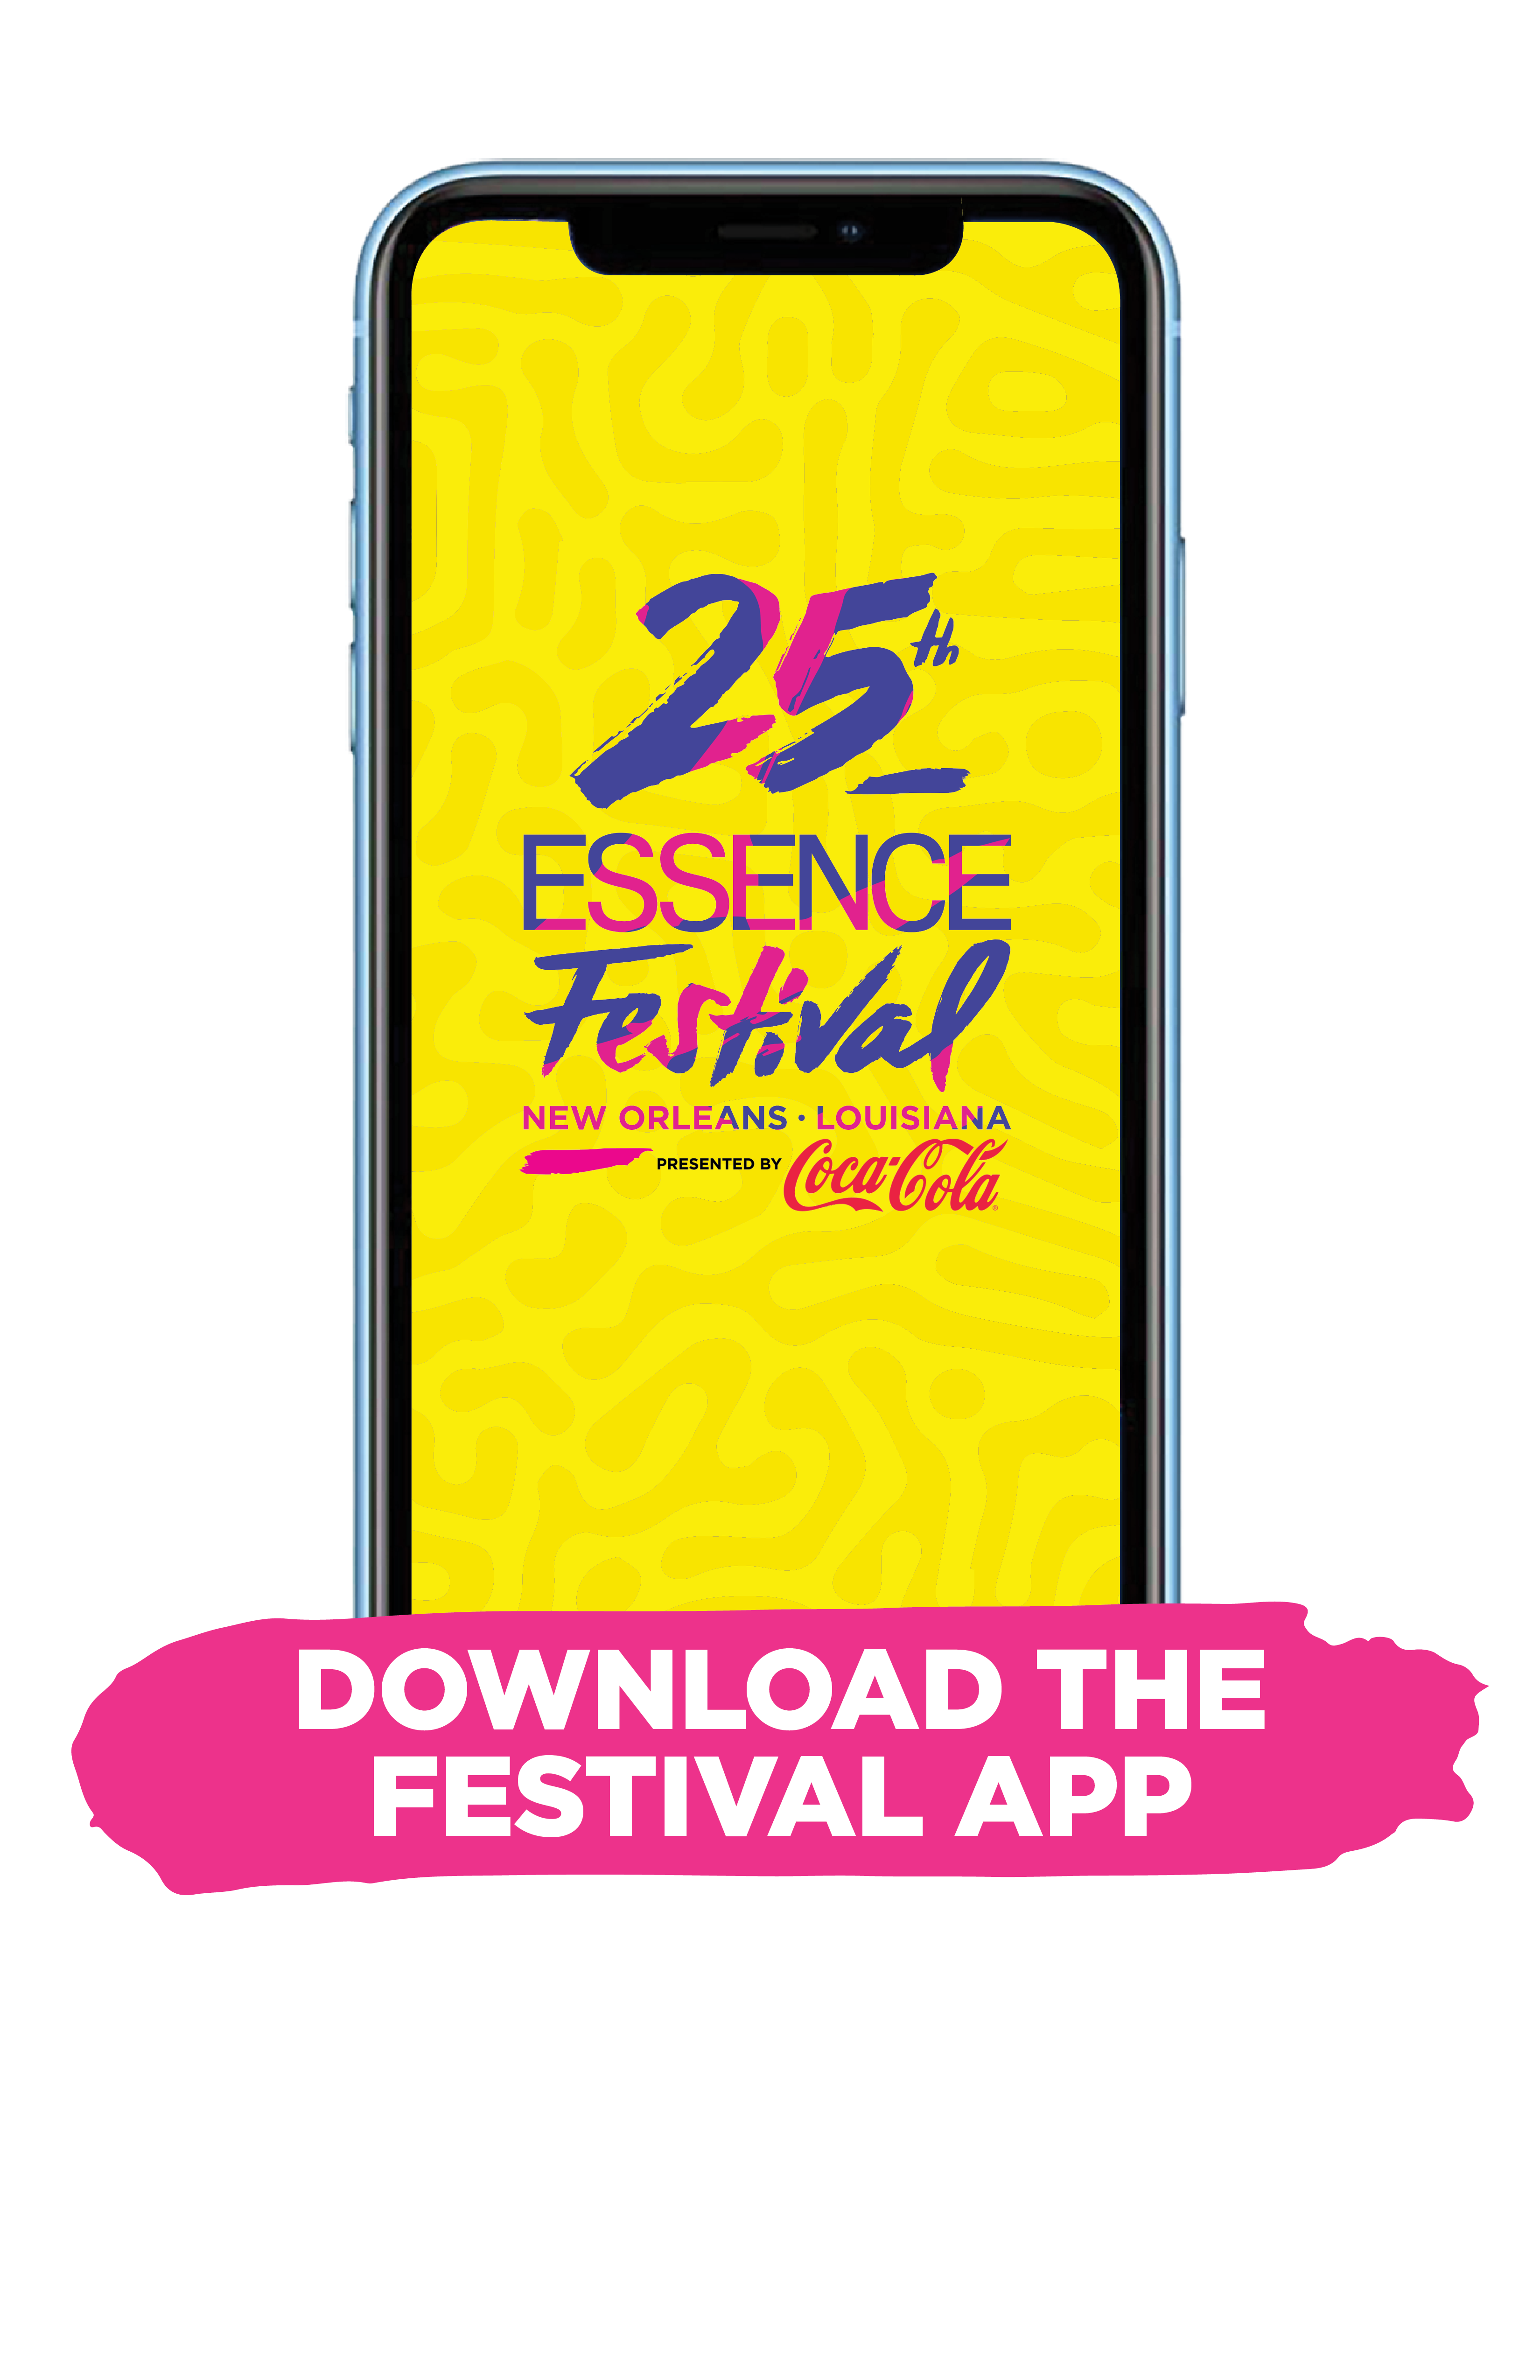 2 Things You Absolutely Need to Know Before Essence Festival